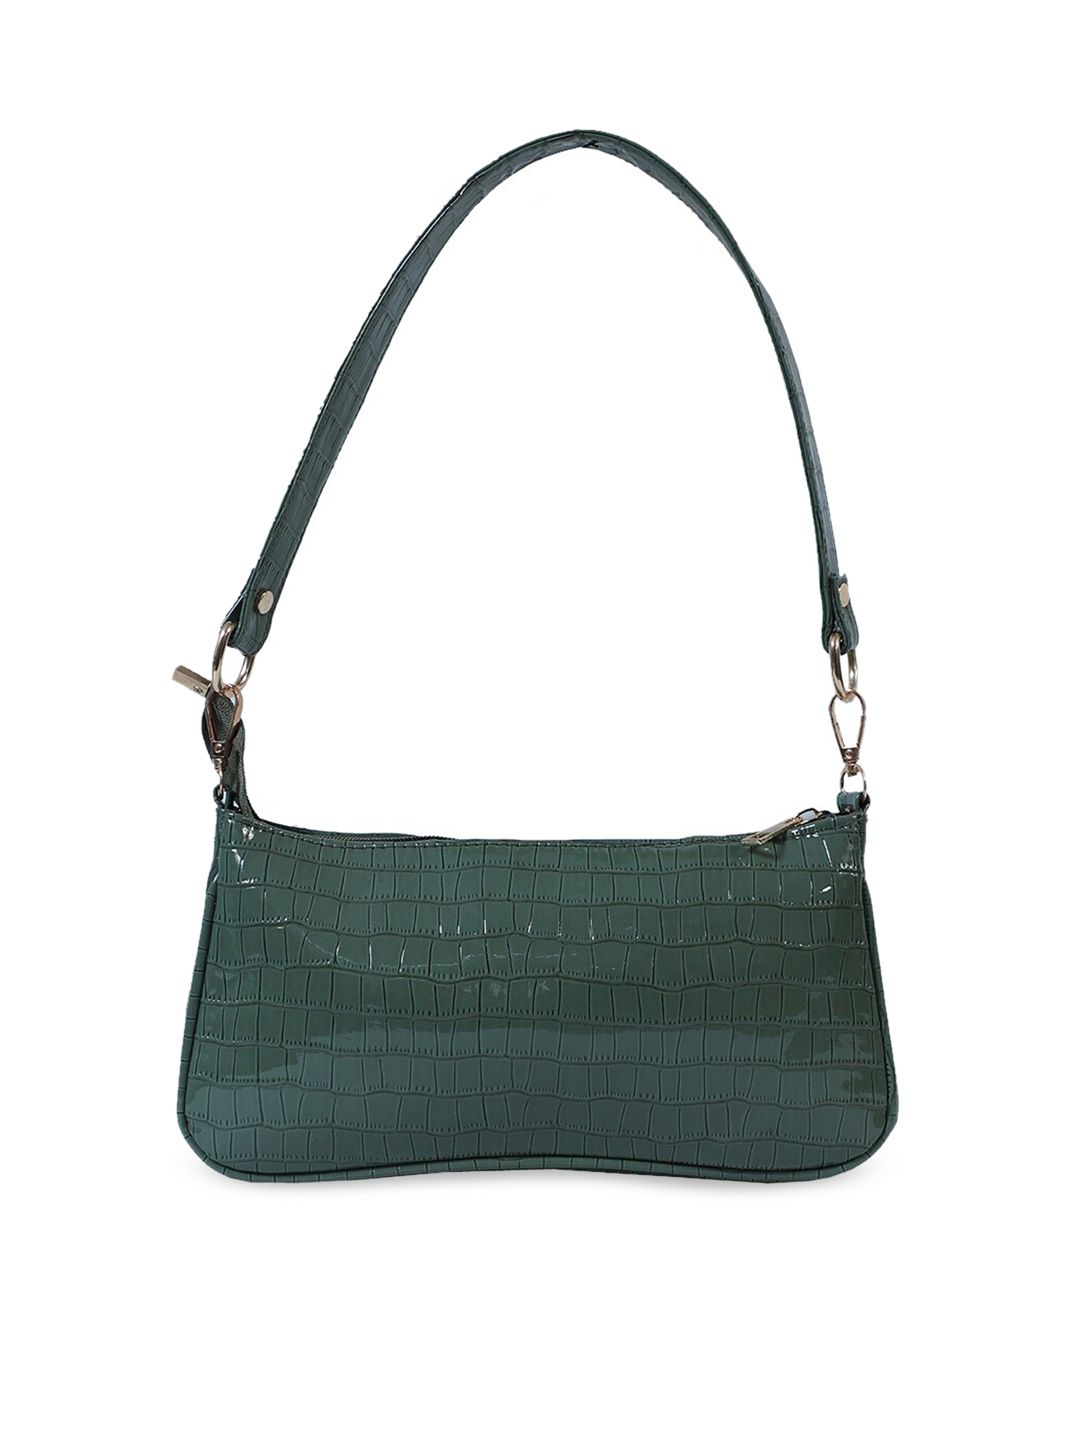 FABBHUE Olive Green Textured PU Structured Shoulder Bag Price in India